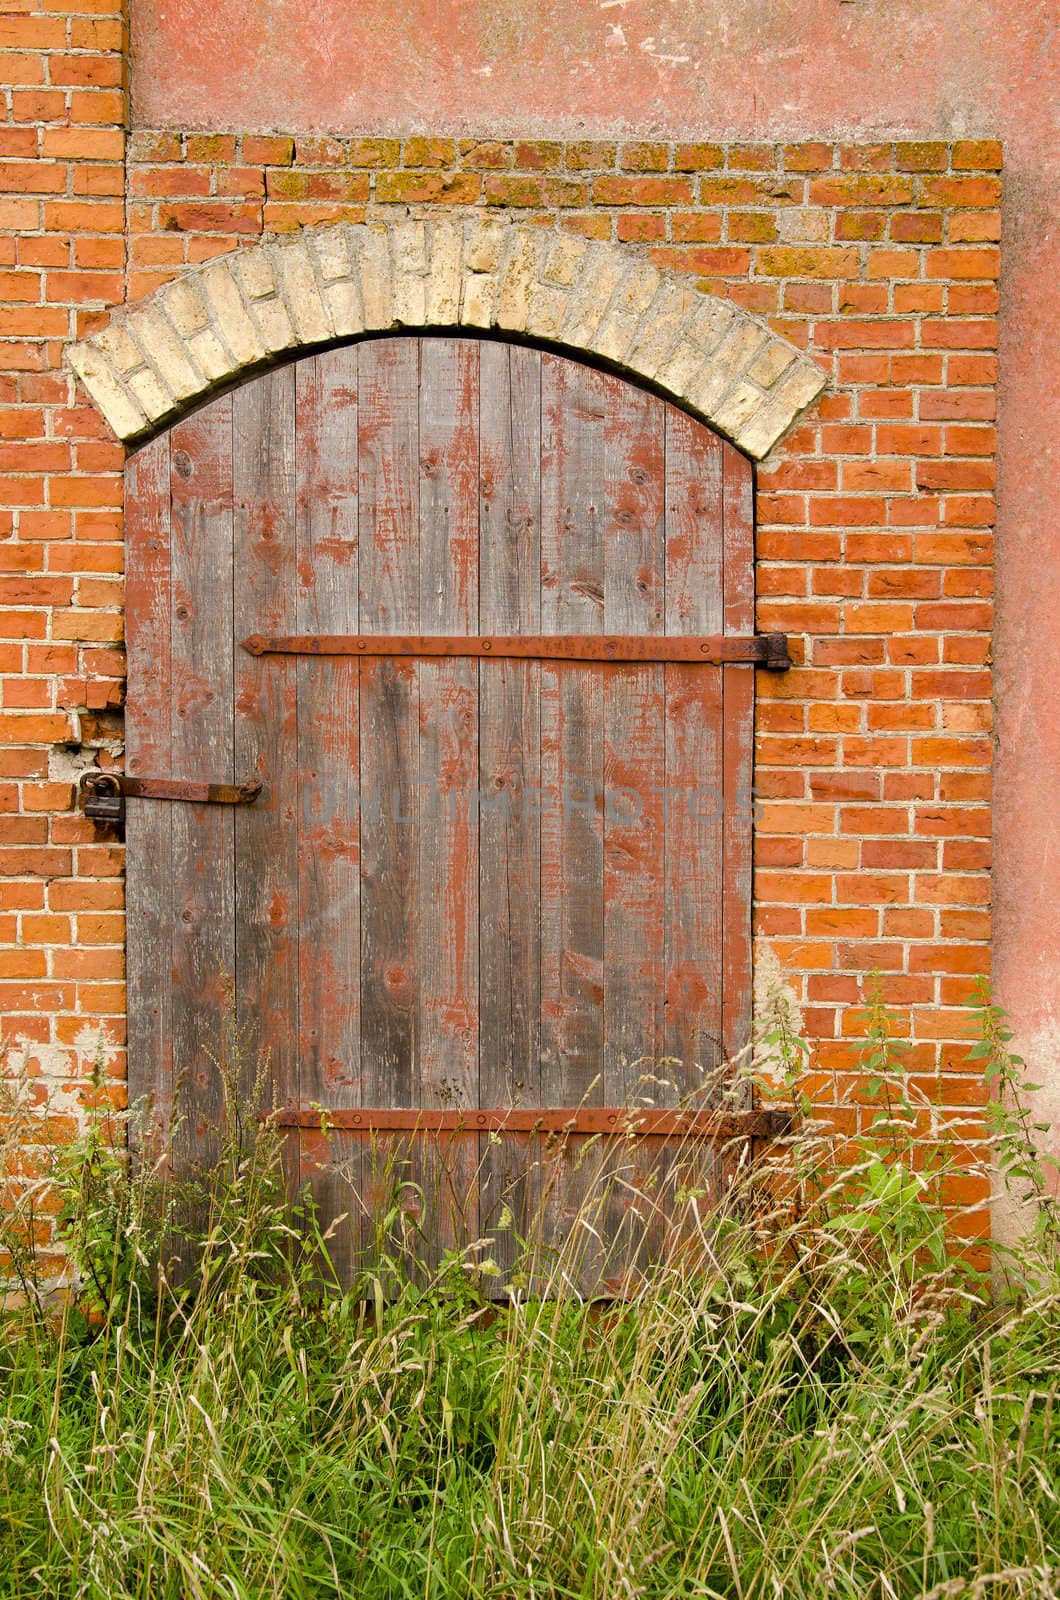 Old abandoned farm building doors locked with lock and tall grass. Red brick building background.